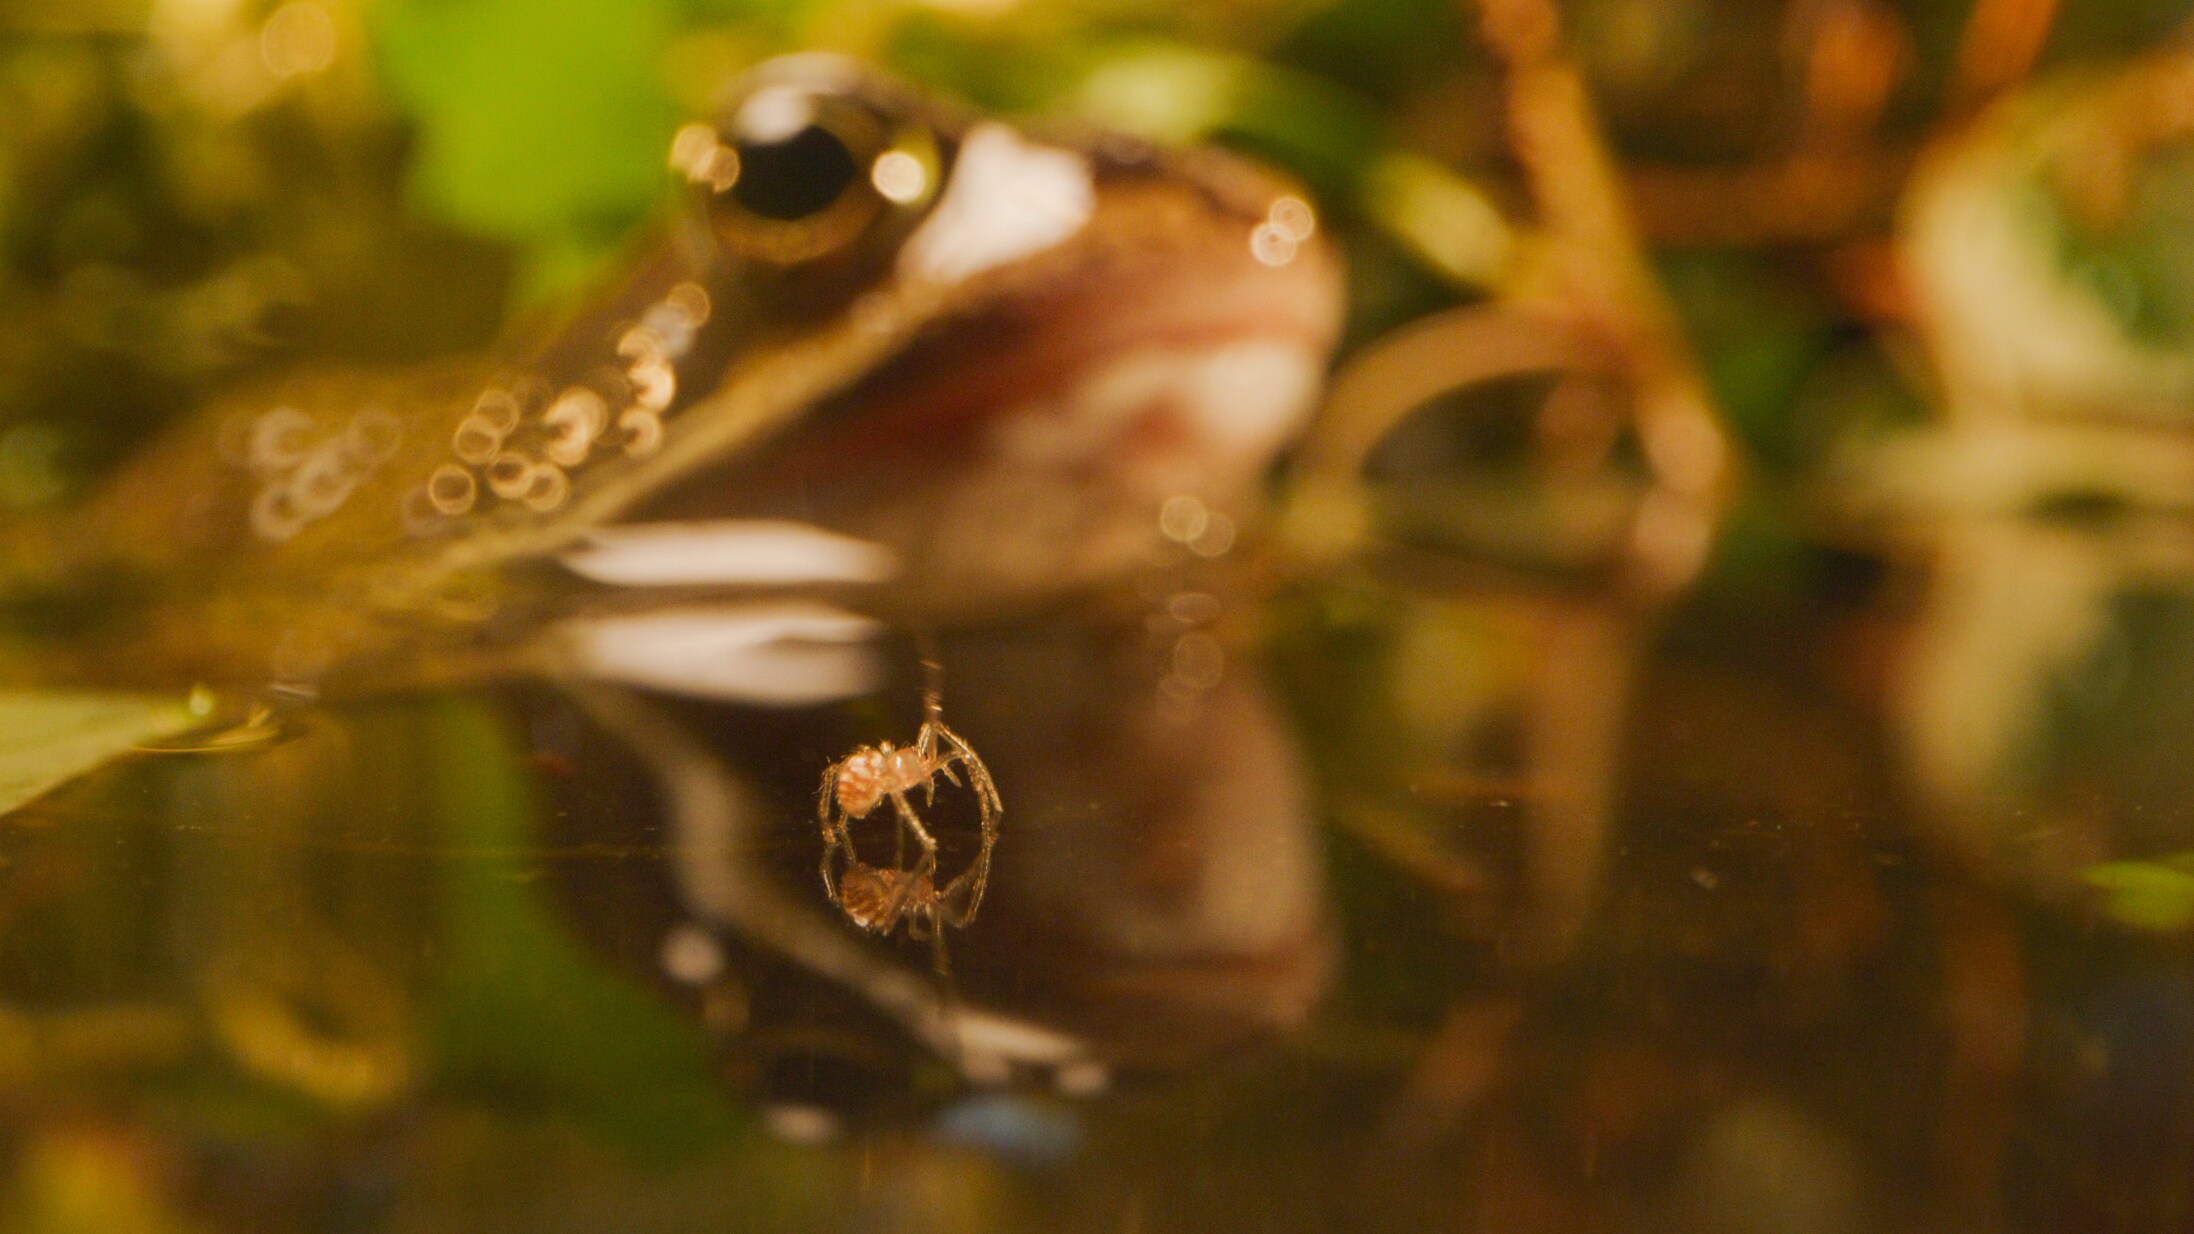 Cupboard spiderling mirroring on water surface with a toad behind. (National Geographic for Disney+/George Woodcock)